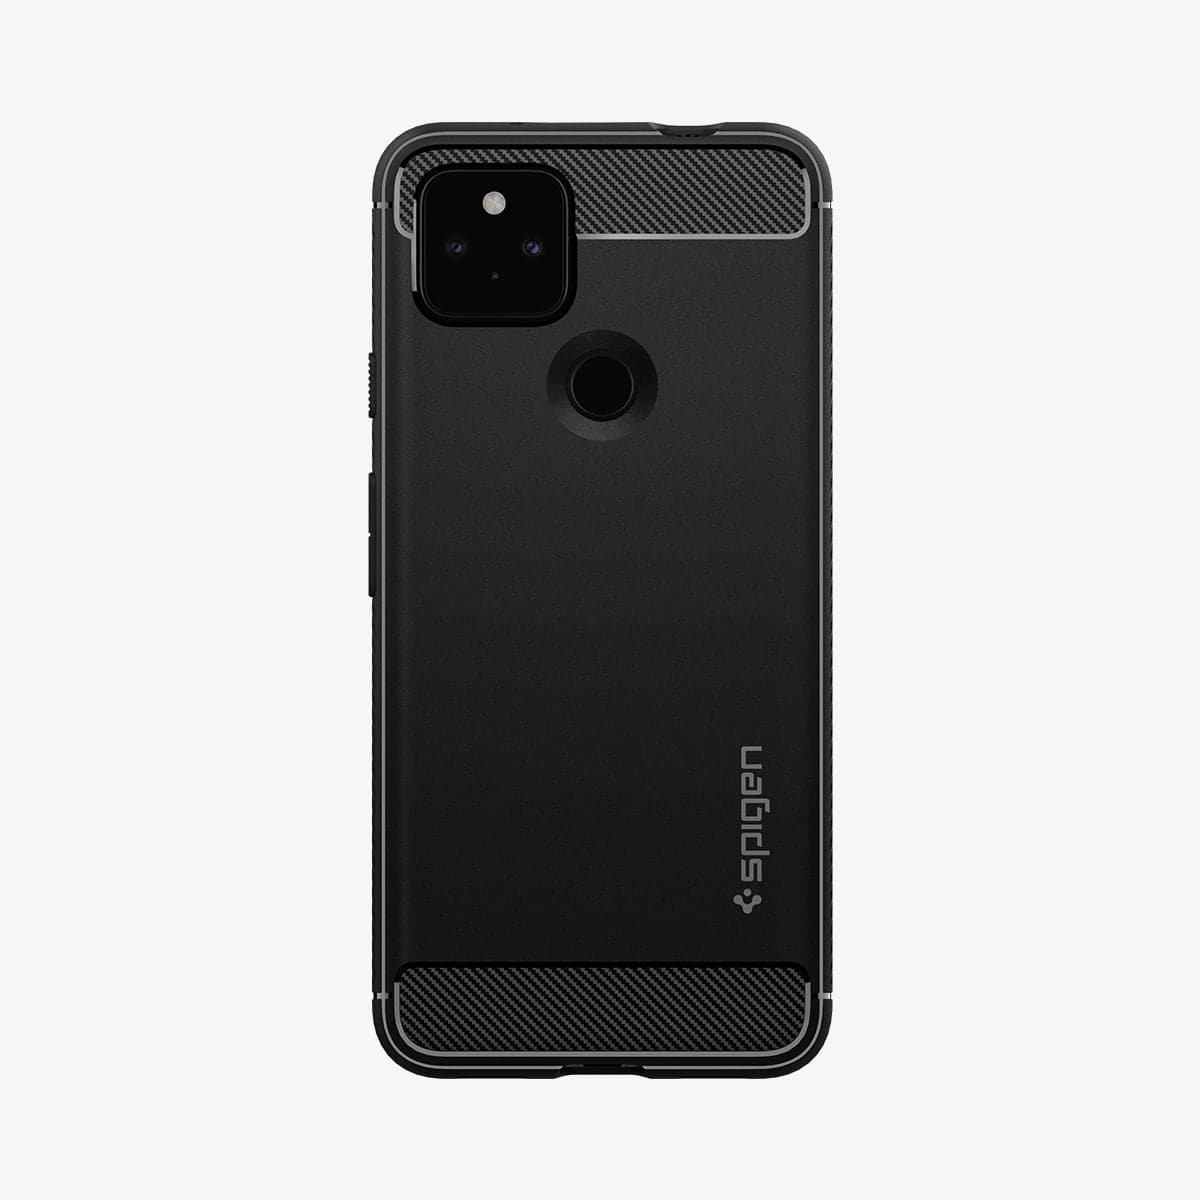 ACS02908 - Pixel 5a Case Rugged Armor in matte black showing the back